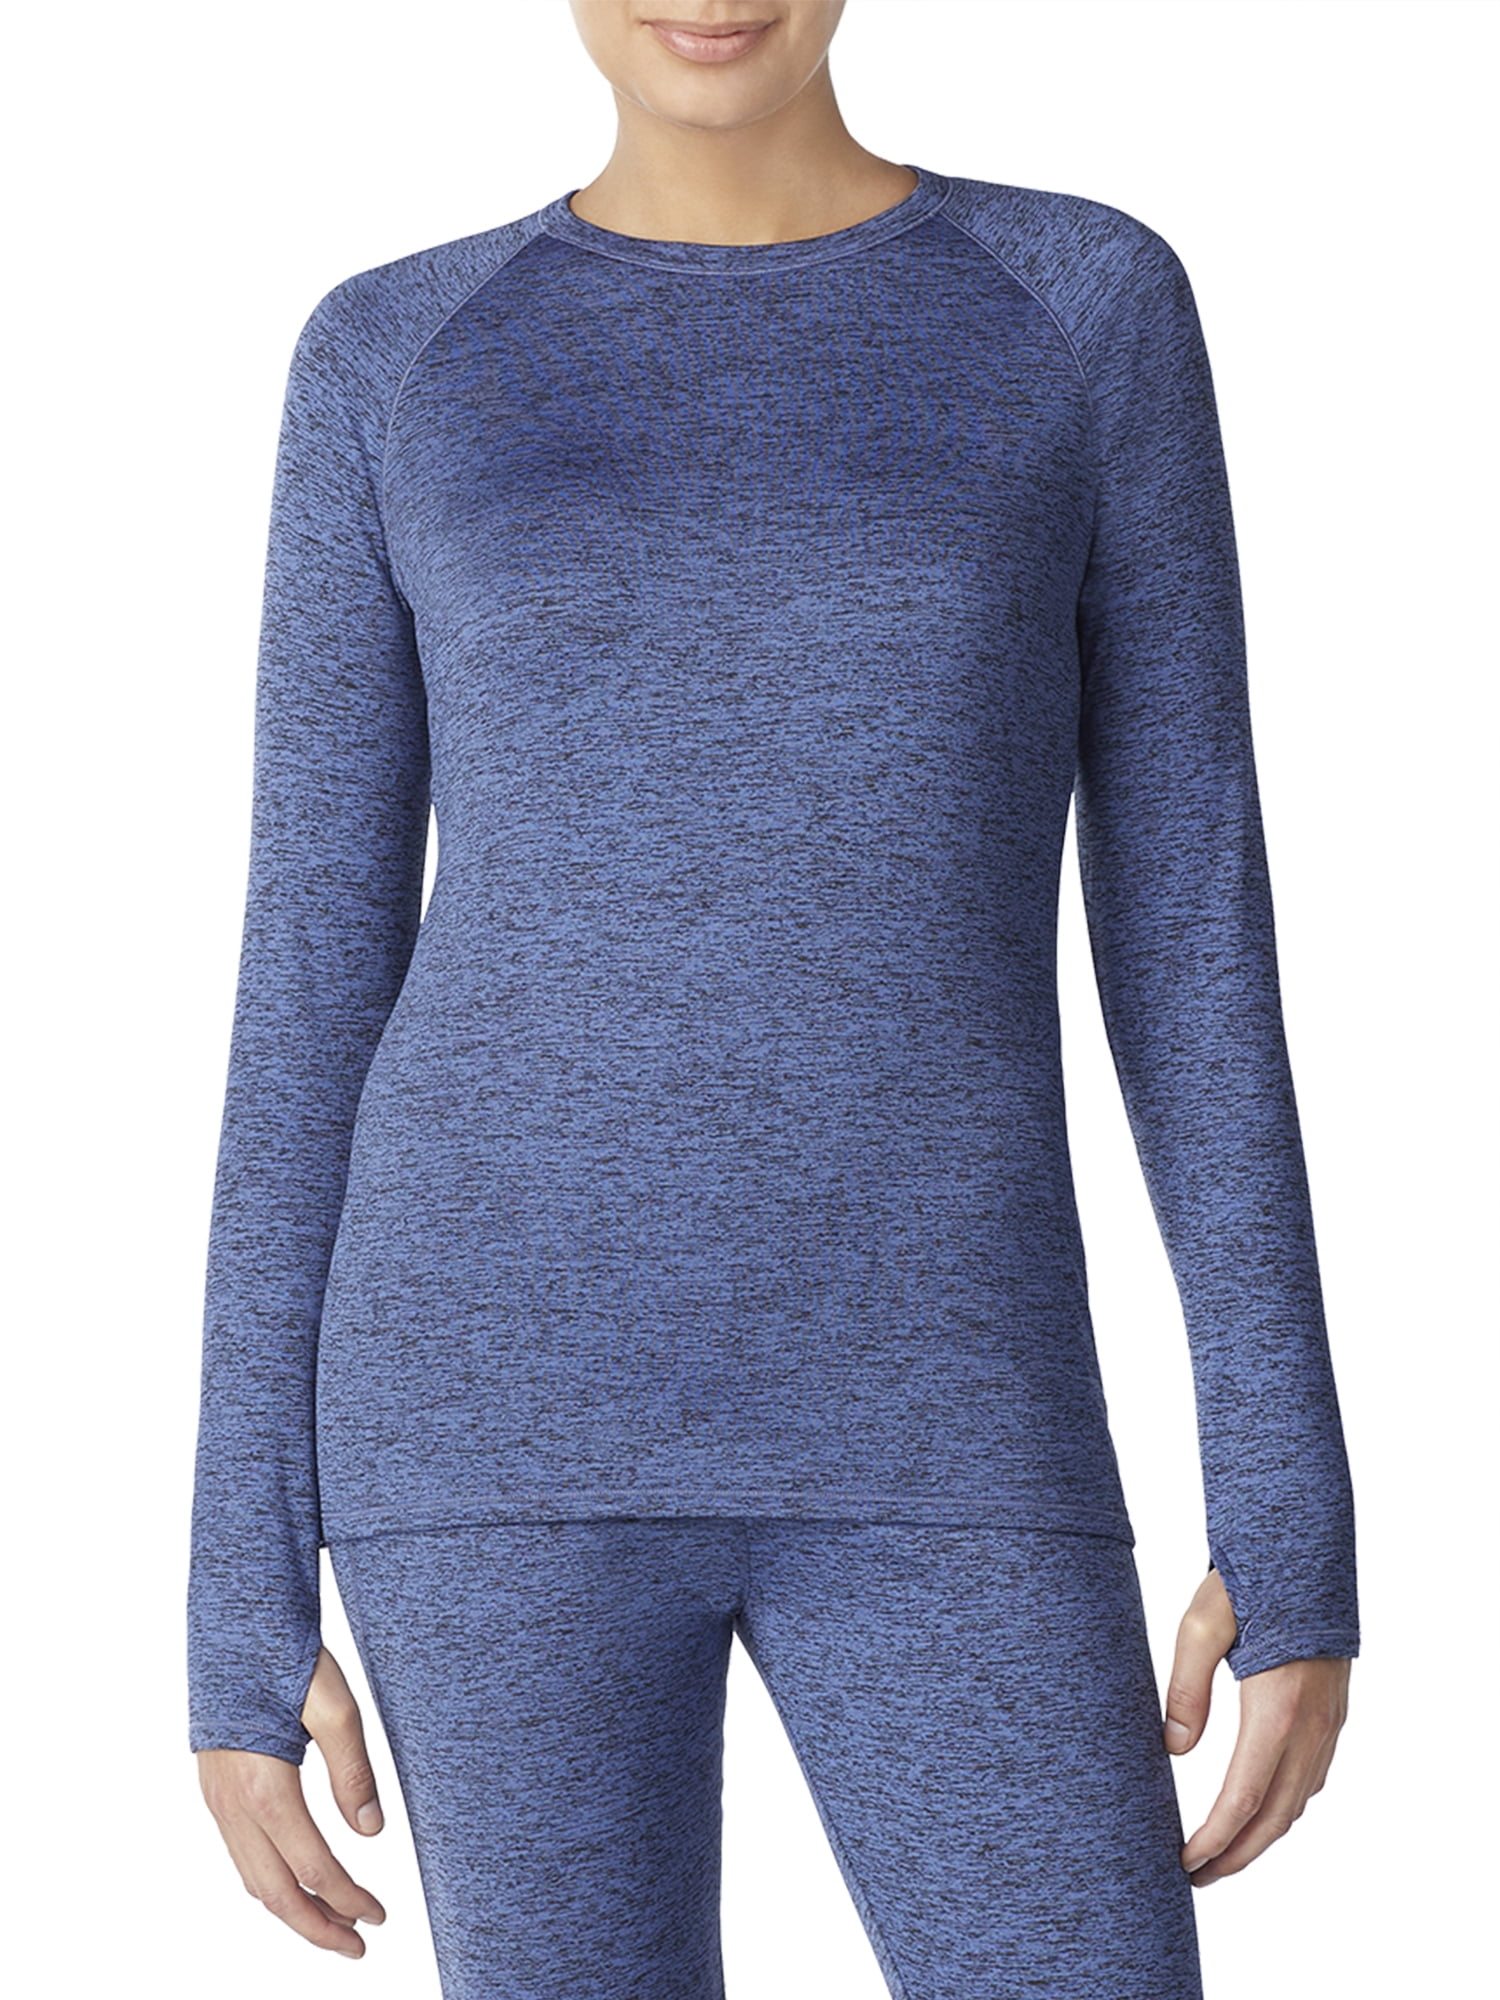 ClimateRight by Cuddl Duds Women's and Women's Plus Plush Warmth